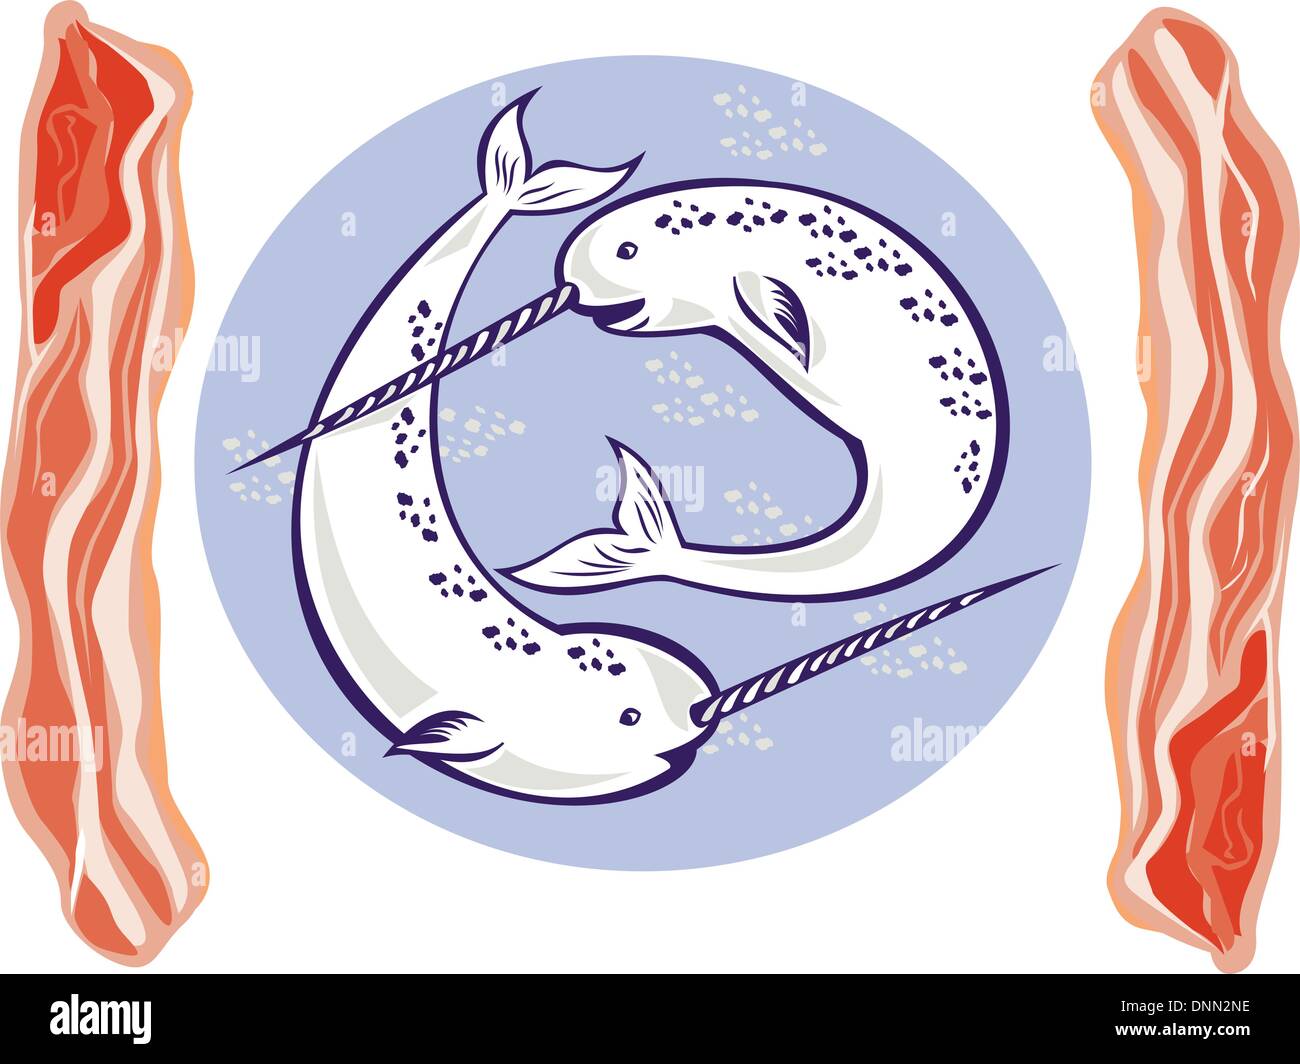 illustration of two narwhal Monodon monoceros unicorn whale with tusk horns set inside oval done with bacon on side Stock Vector